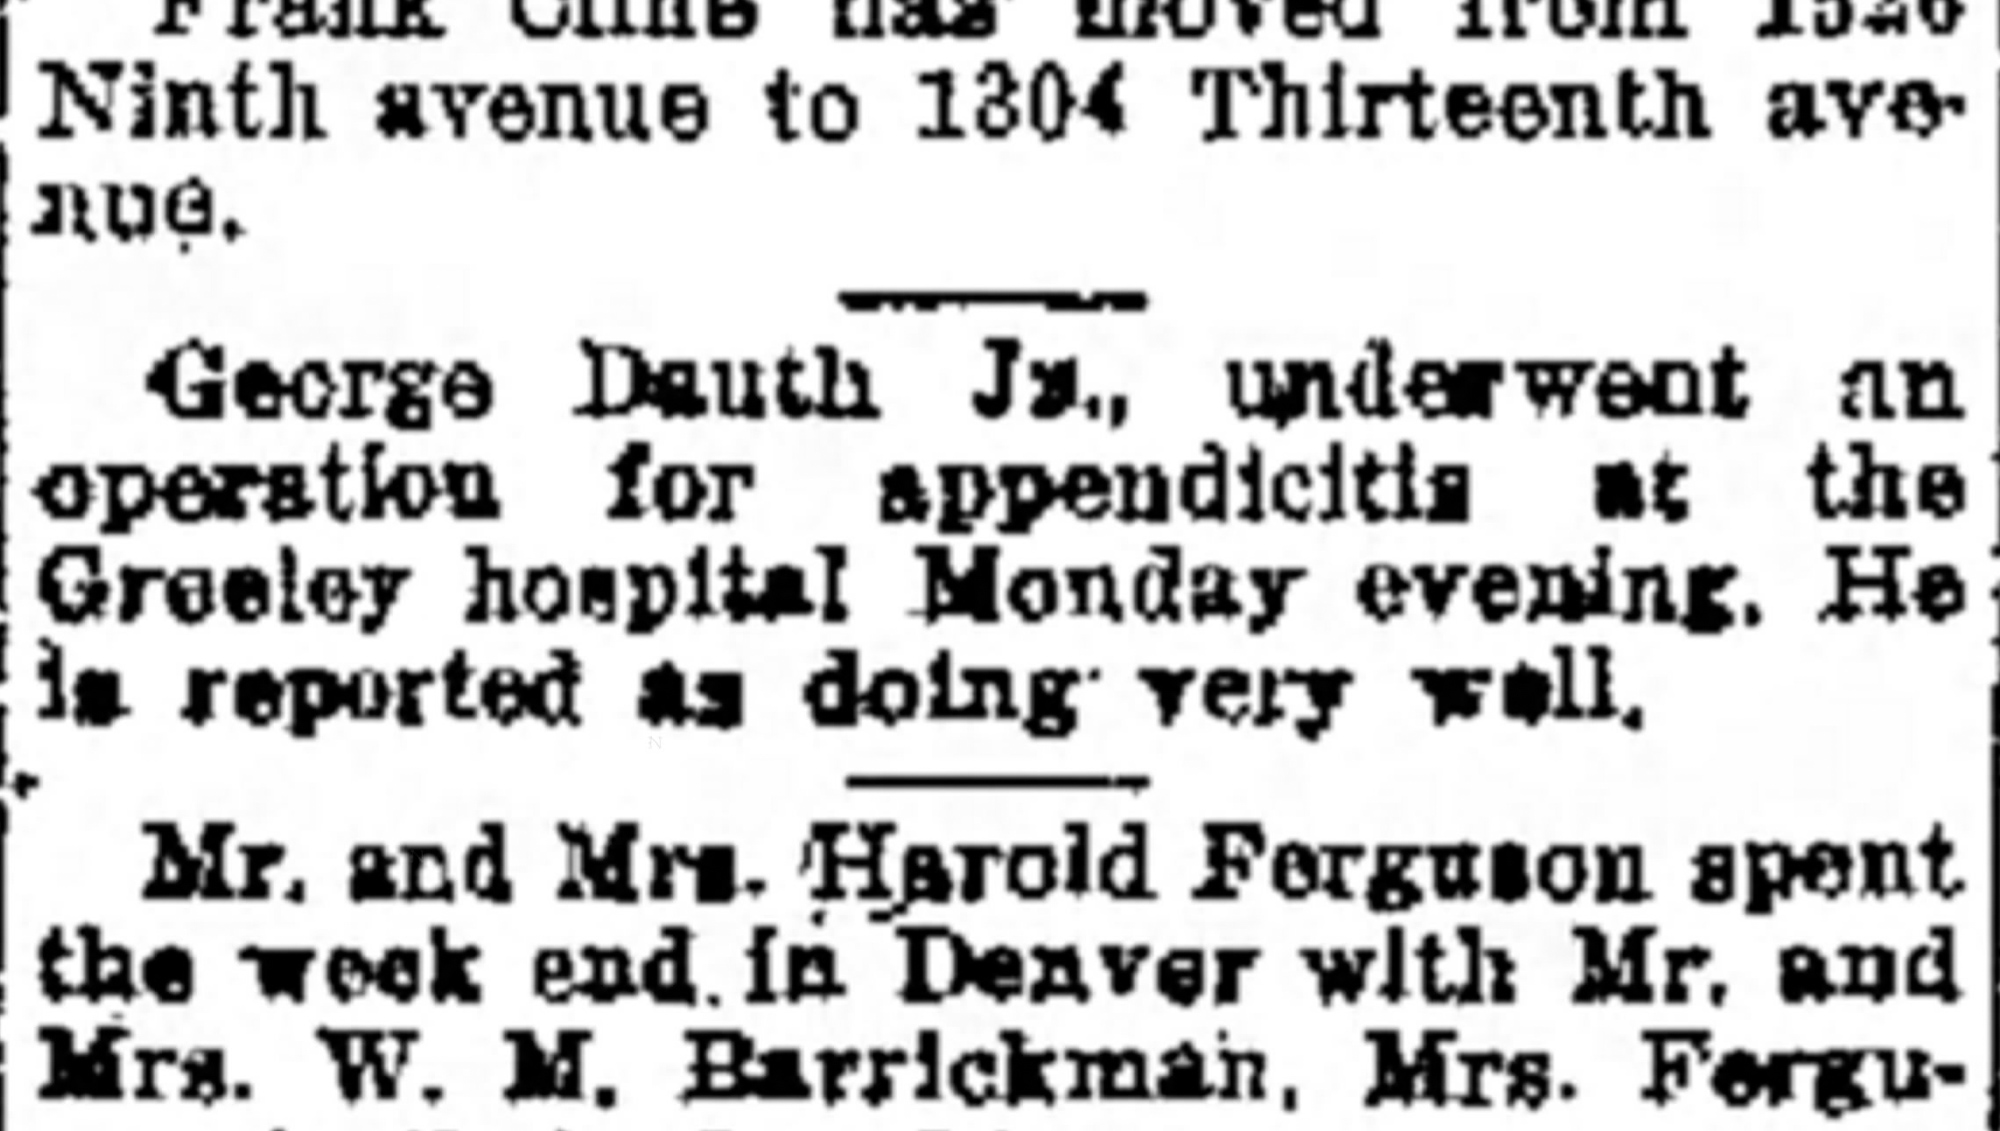 Dauth Family Archive - 1932-04-20 - Greeley Daily Tribune - June Dauth has Appendicitis Surgery